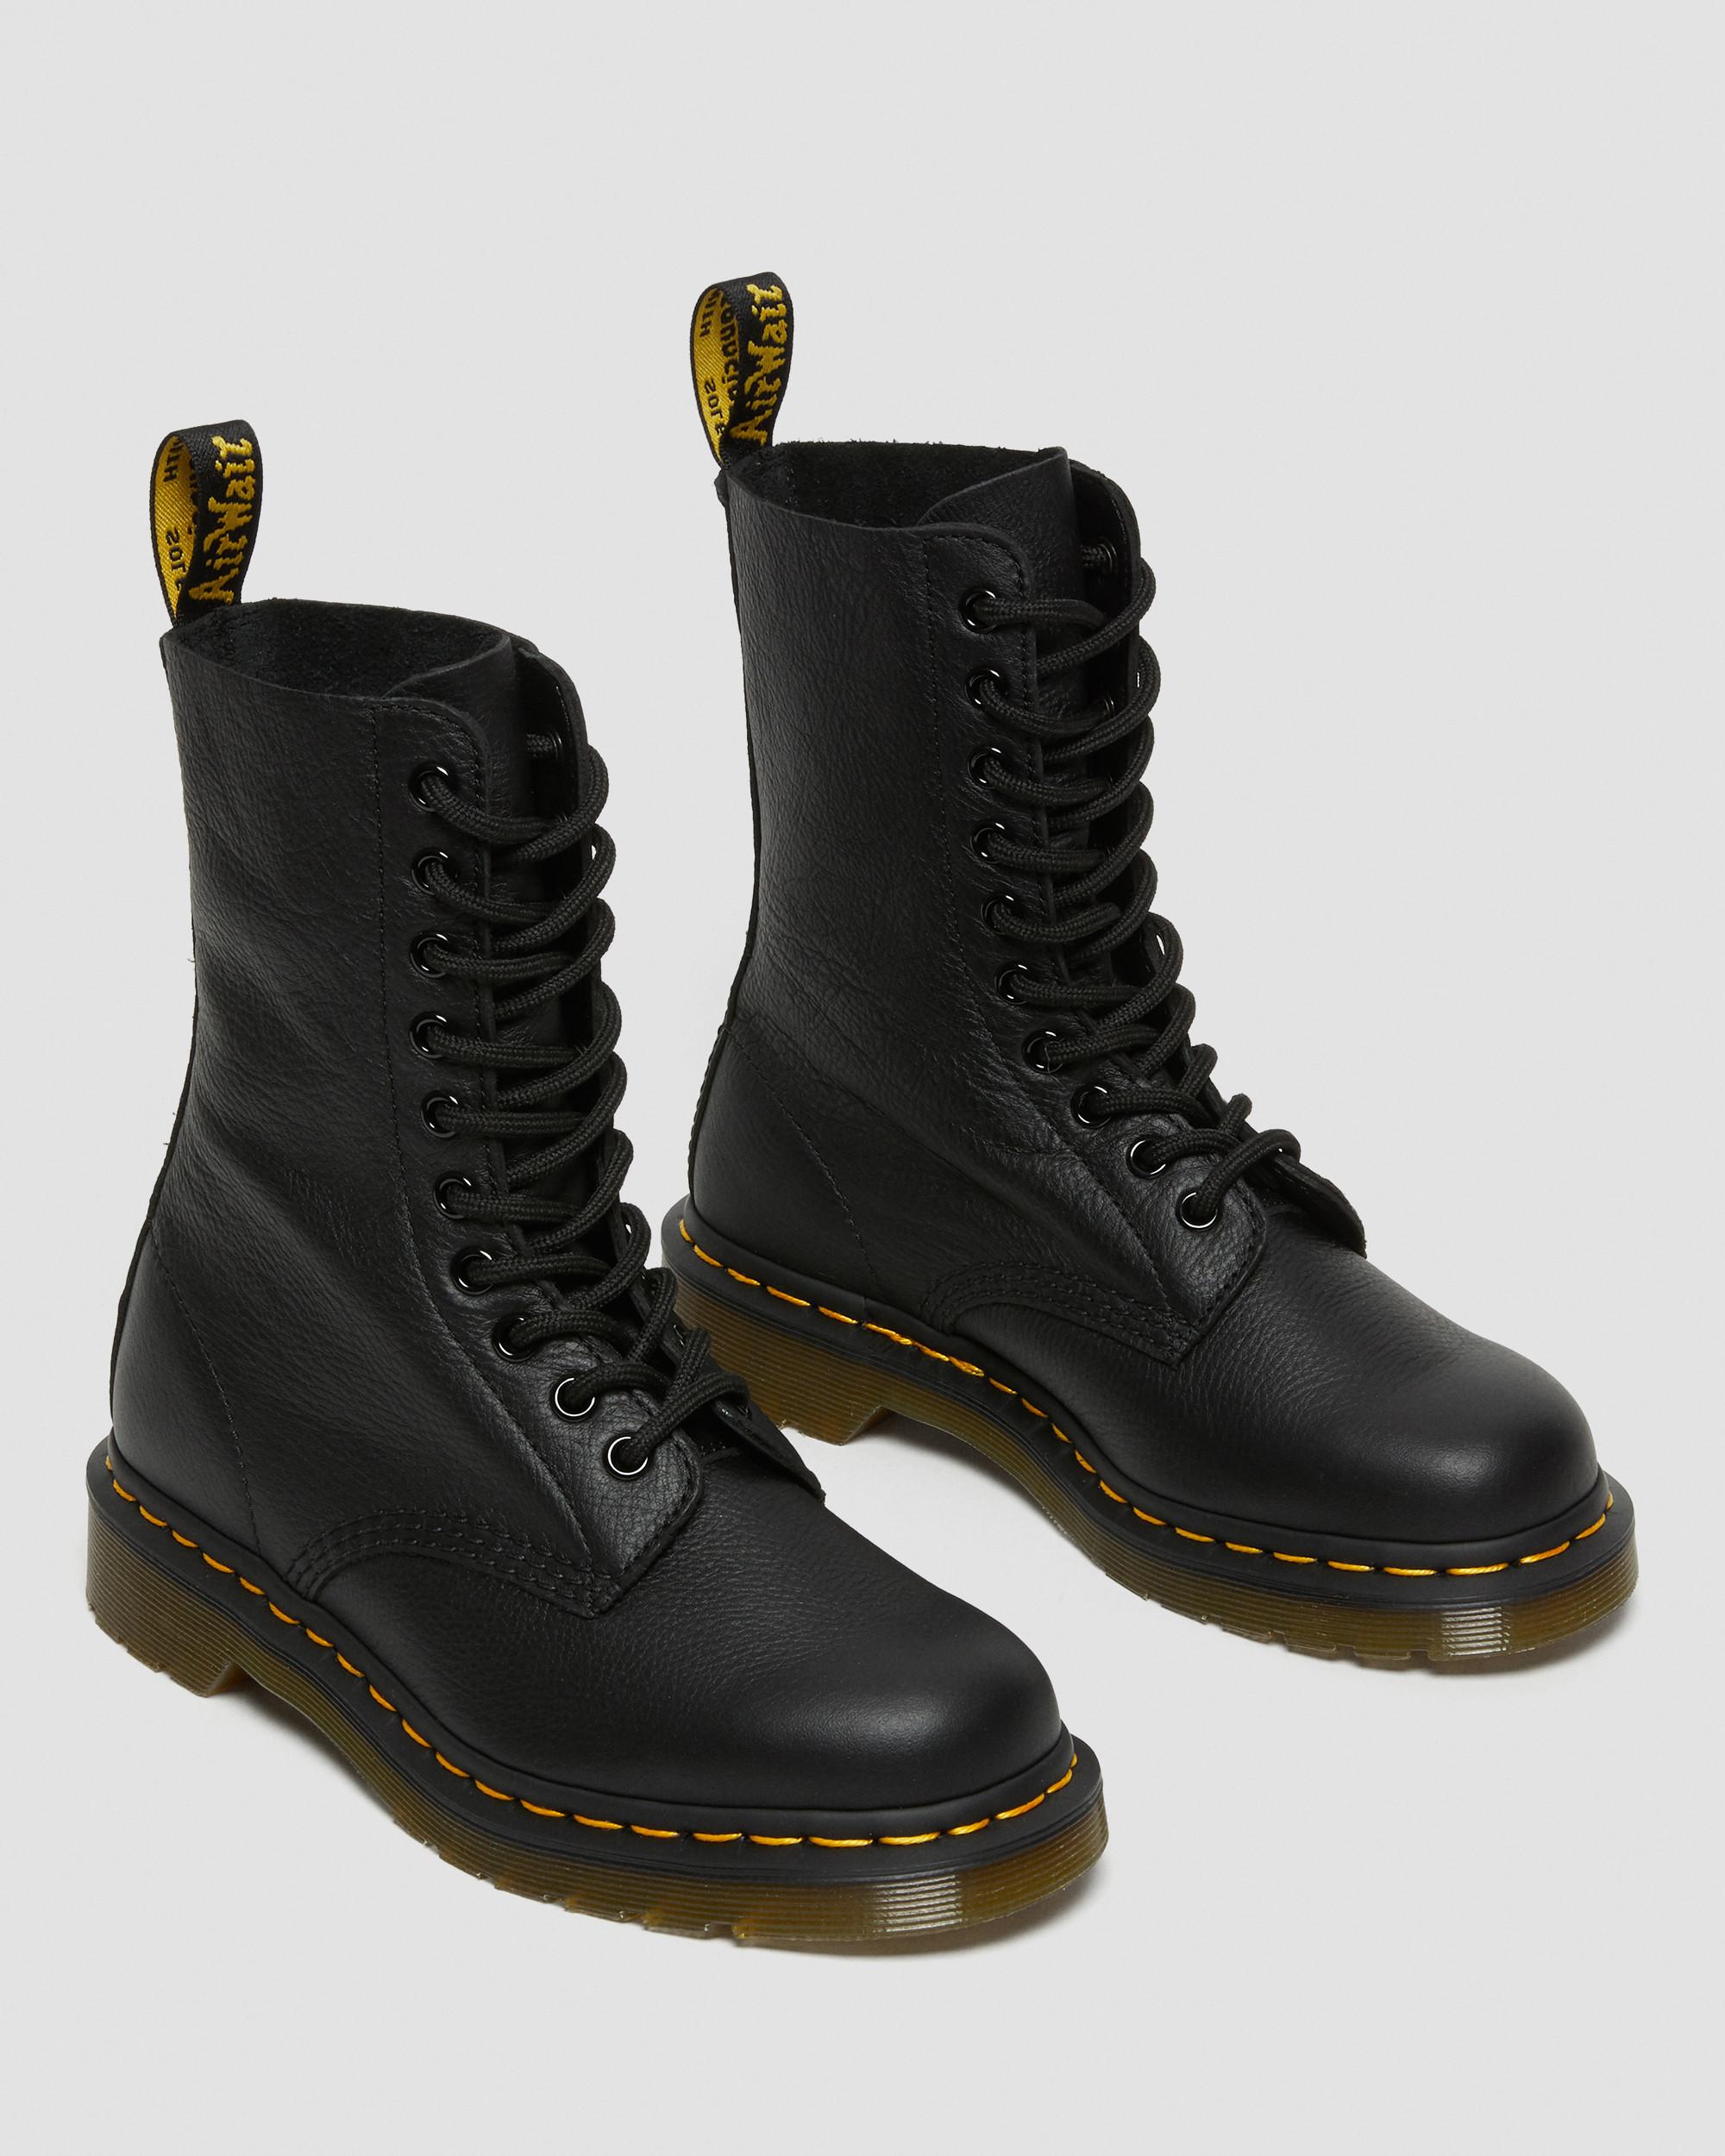 DR MARTENS 1490 Virginia Leather Mid Calf Boots